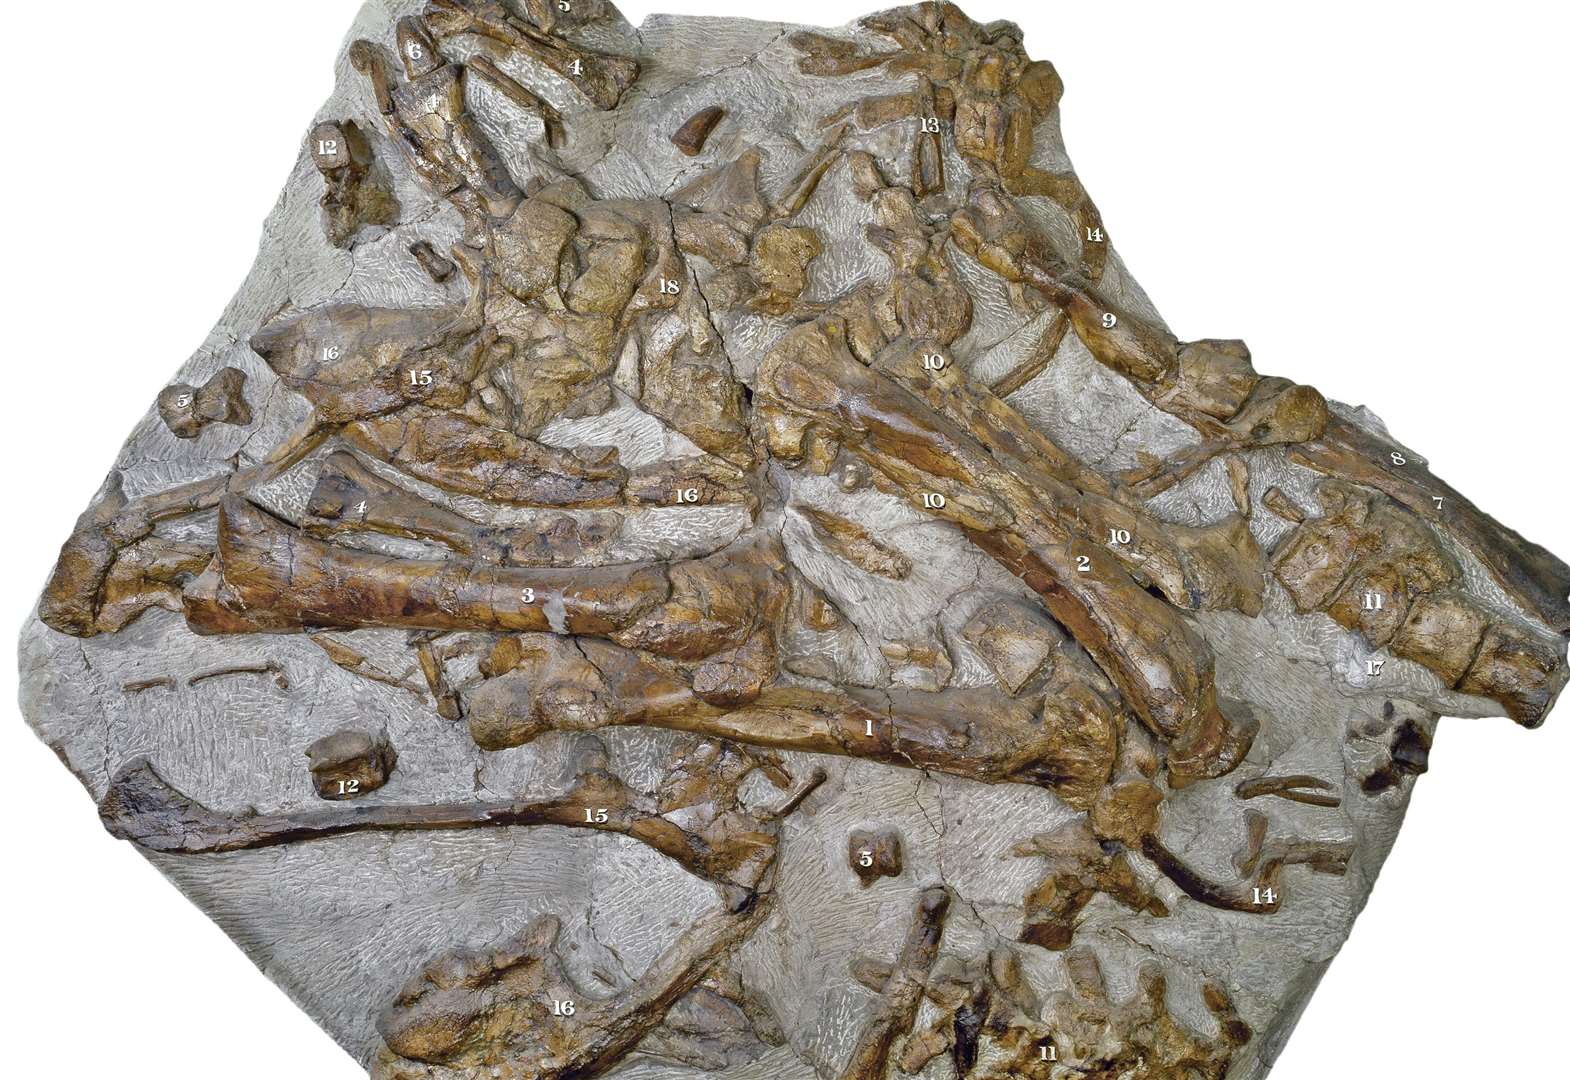 The Iguanodon bones found in Maidstone. Picture: Trustees of the NHM, London